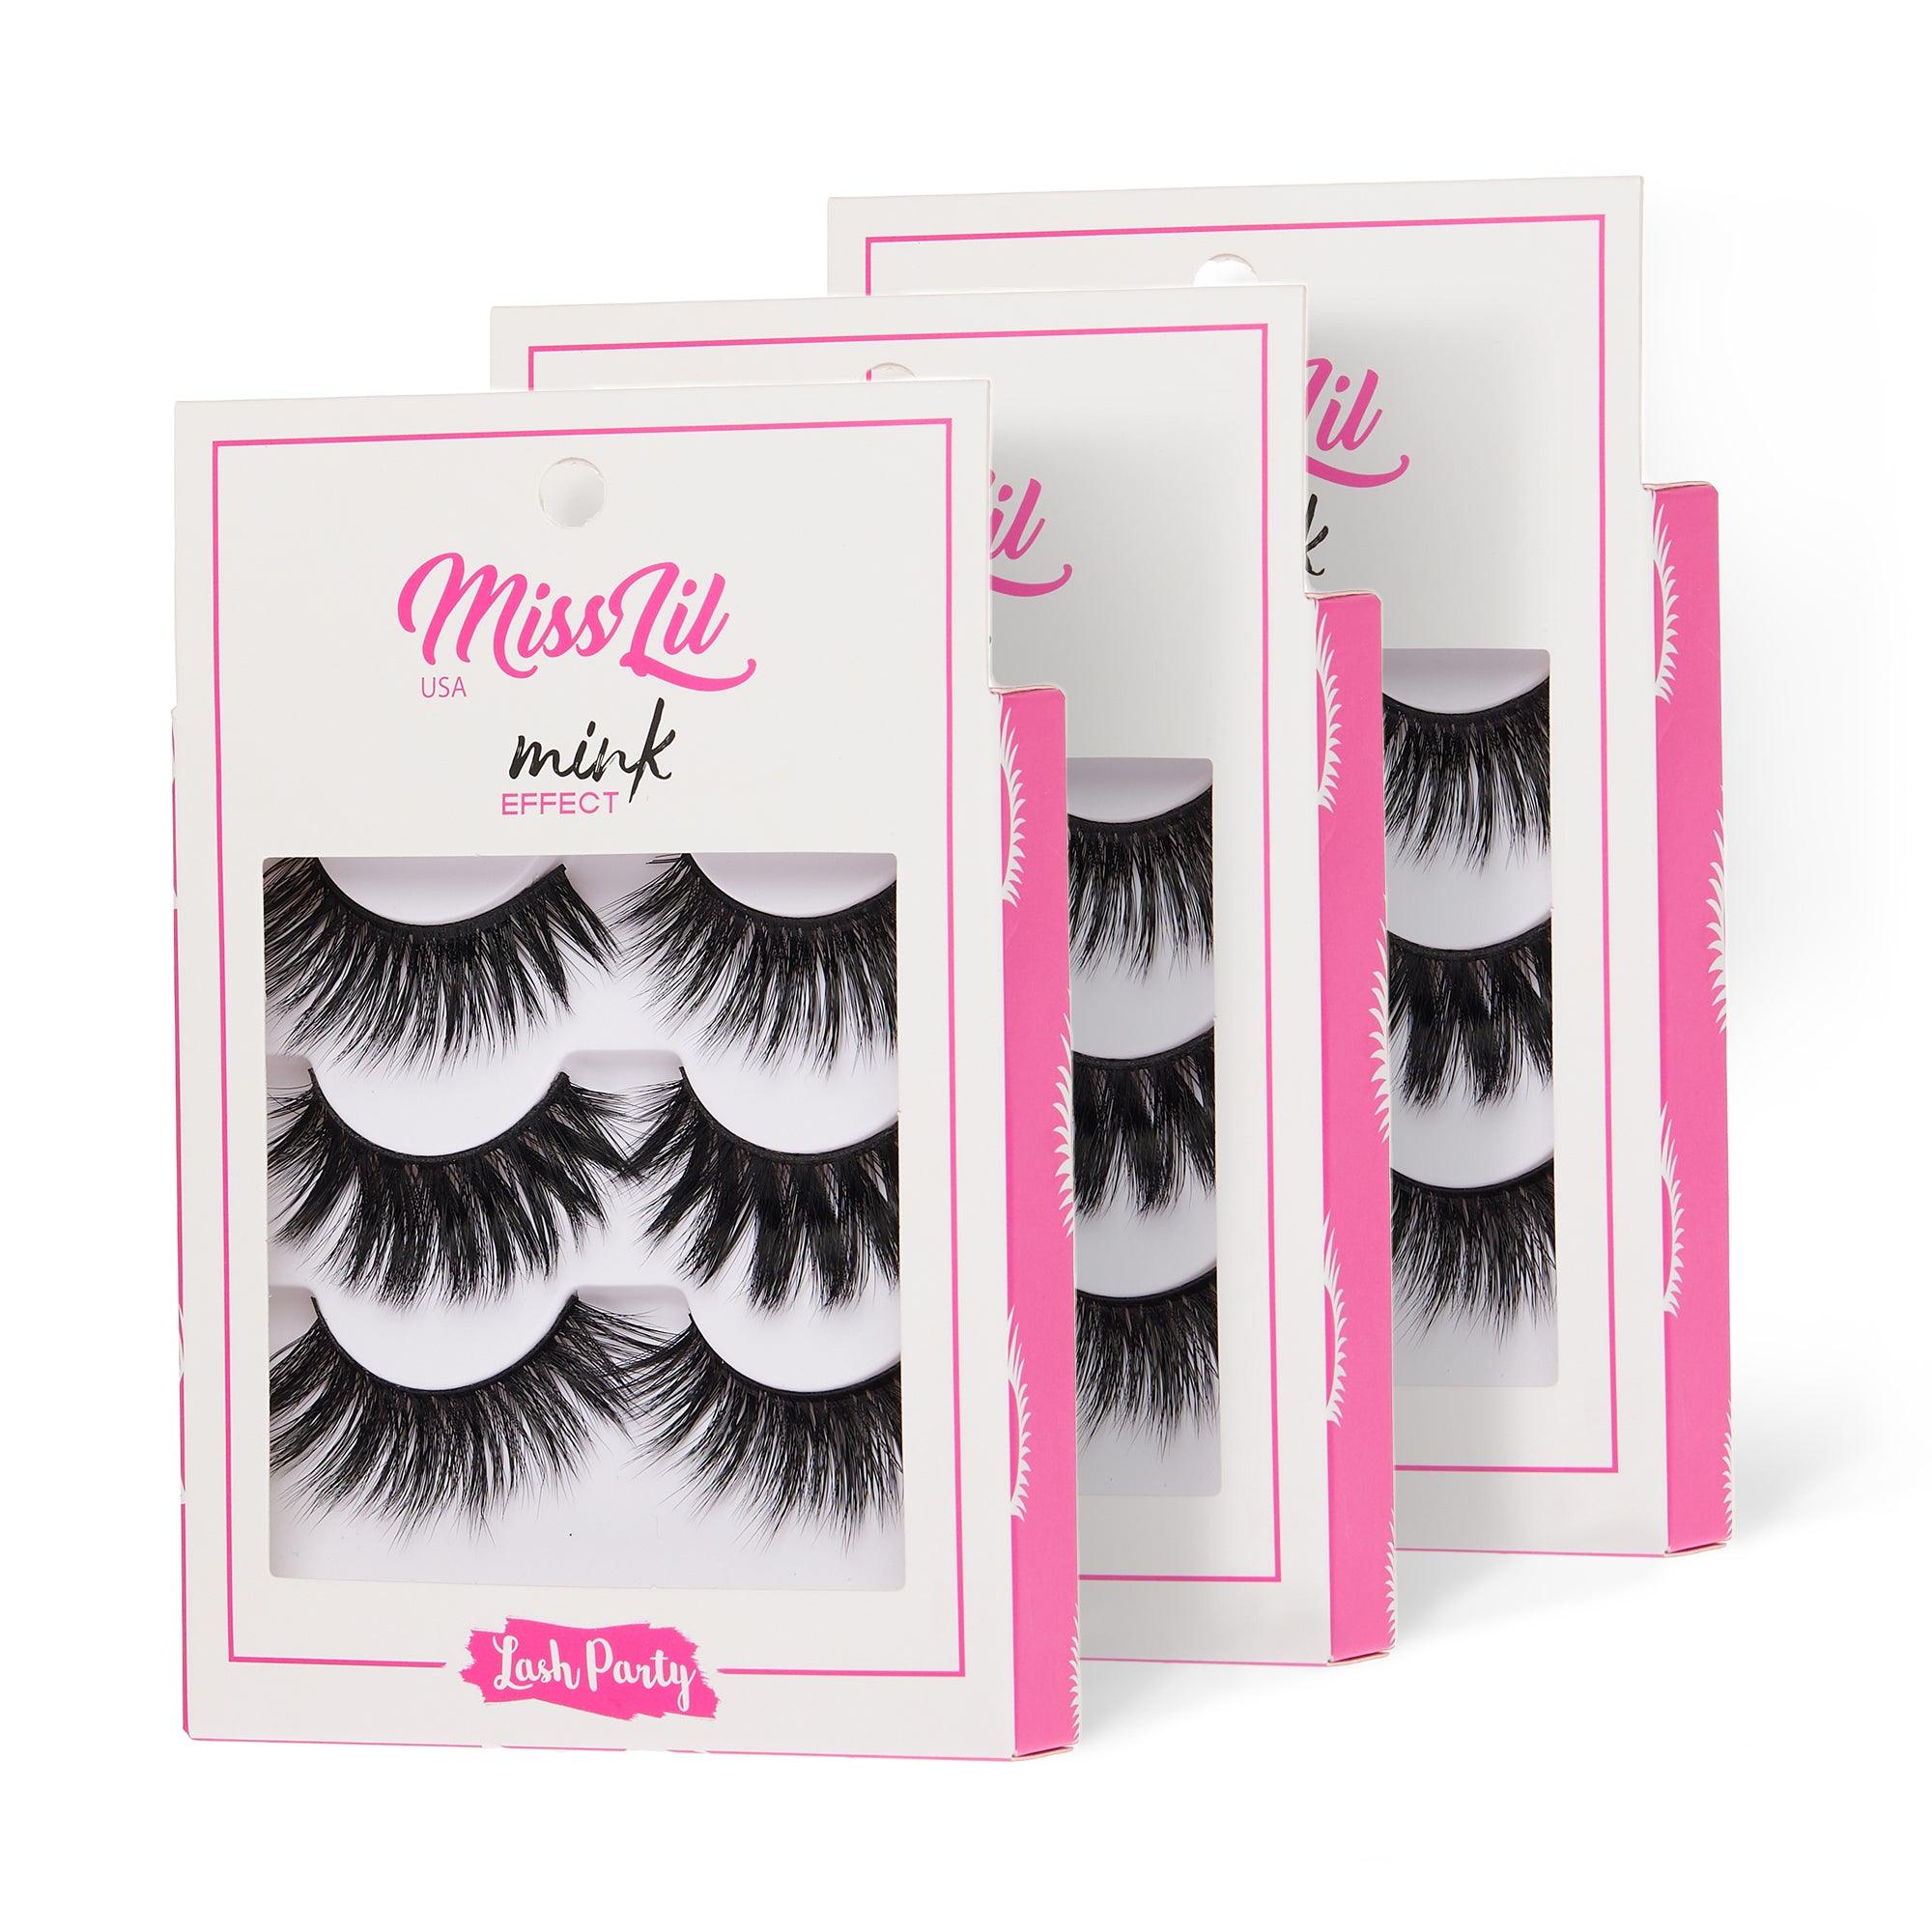 3-Pair Faux Mink Effect Eyelashes - Lash Party Collection #26 - Pack of 3 - Miss Lil USA